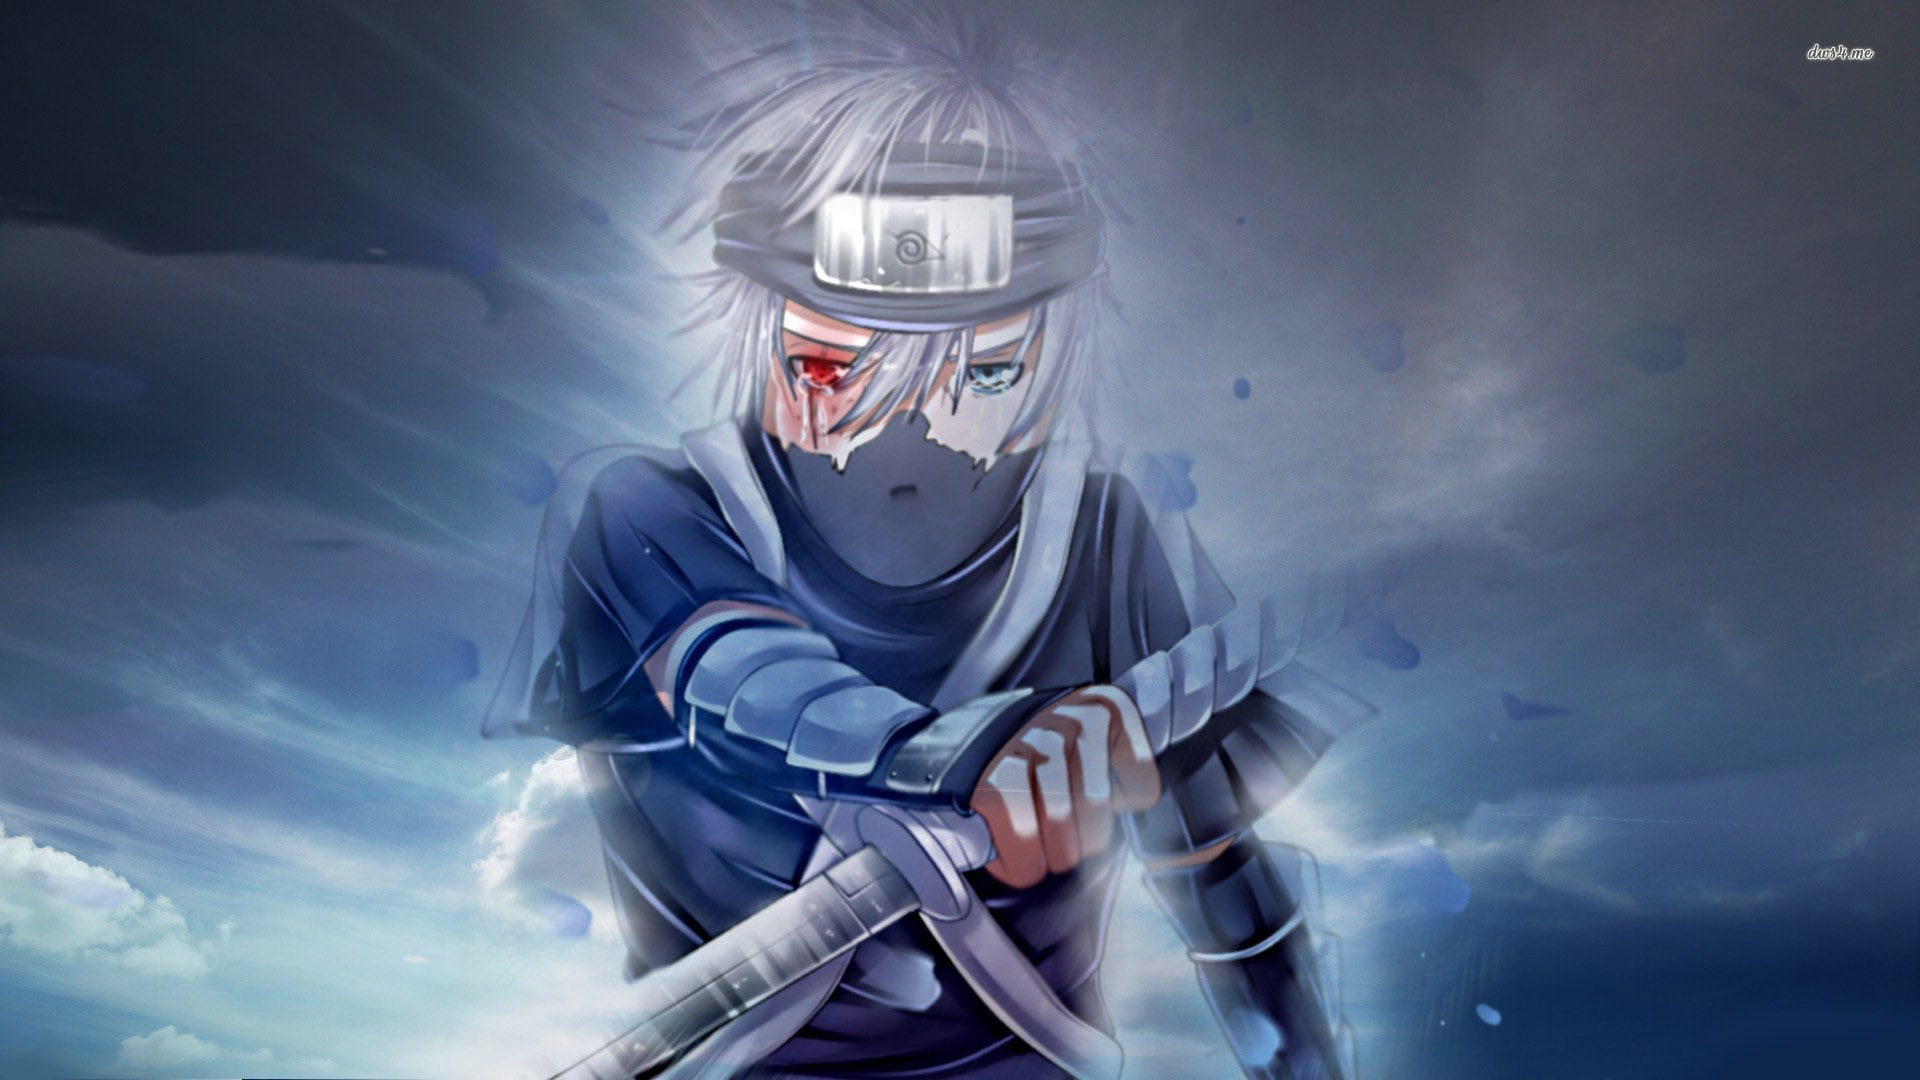 Free A4 Naruto Kakashi Hataki HD Desktop background images pictures wallpapers downloads